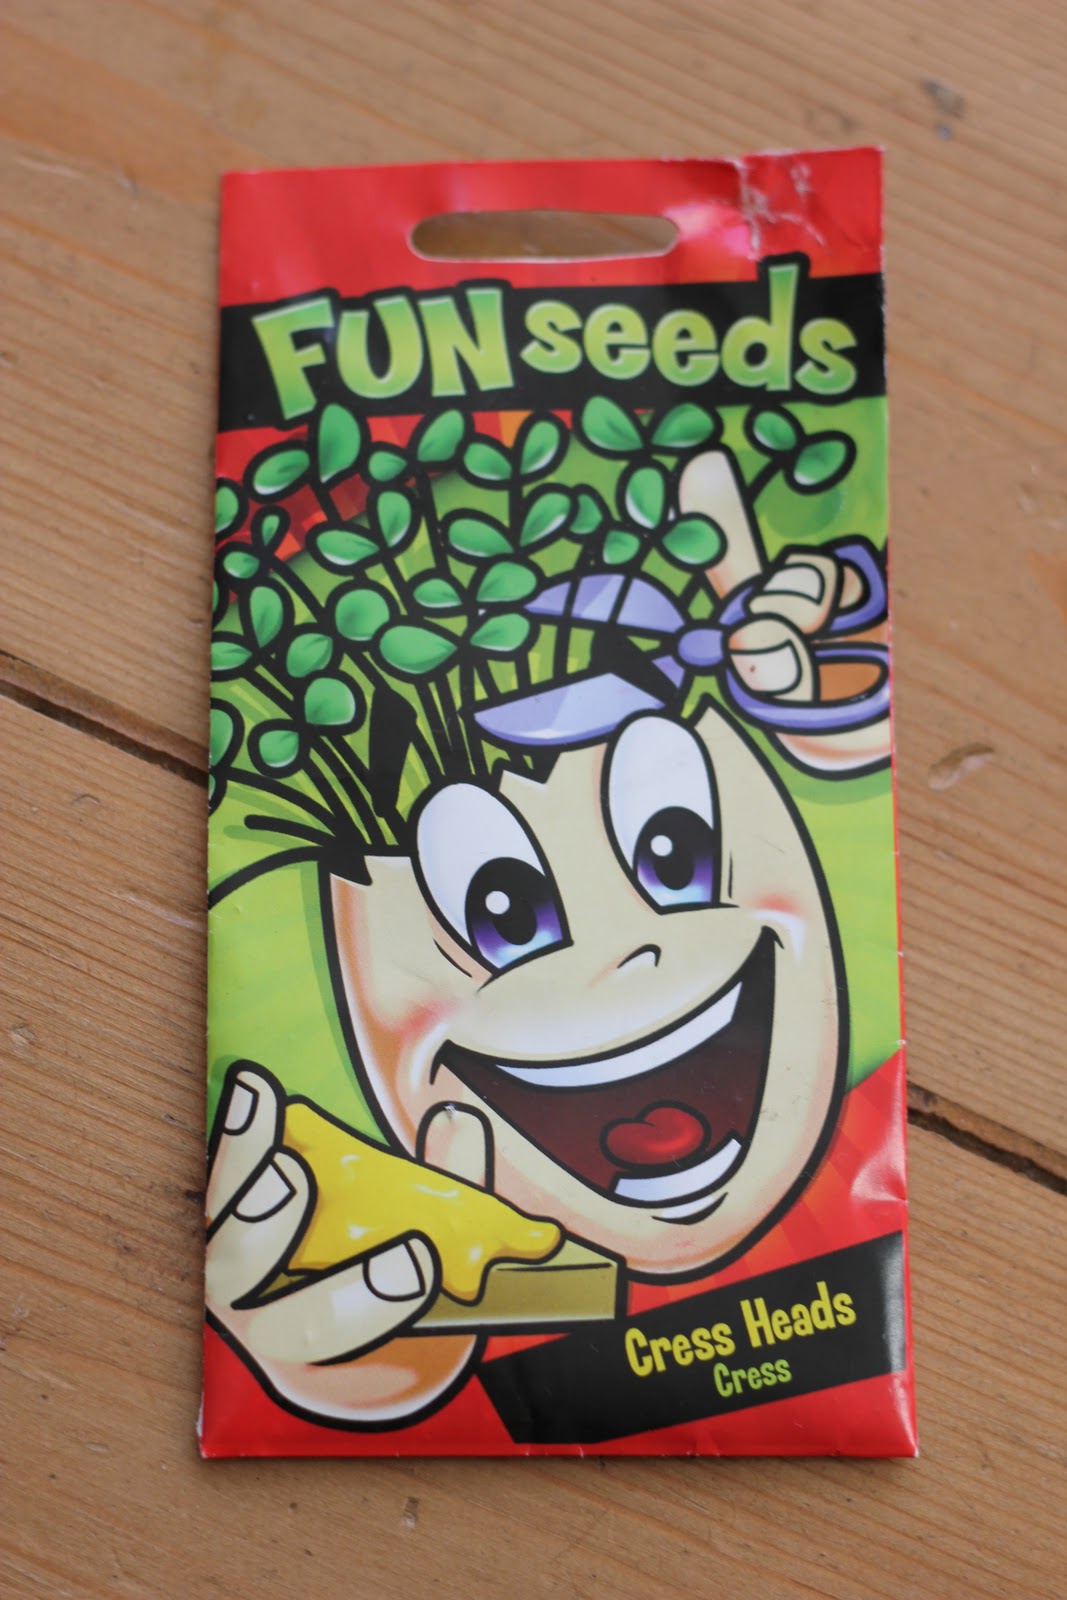 Growing Cress Heads and Cress Initials! - The Imagination Tree